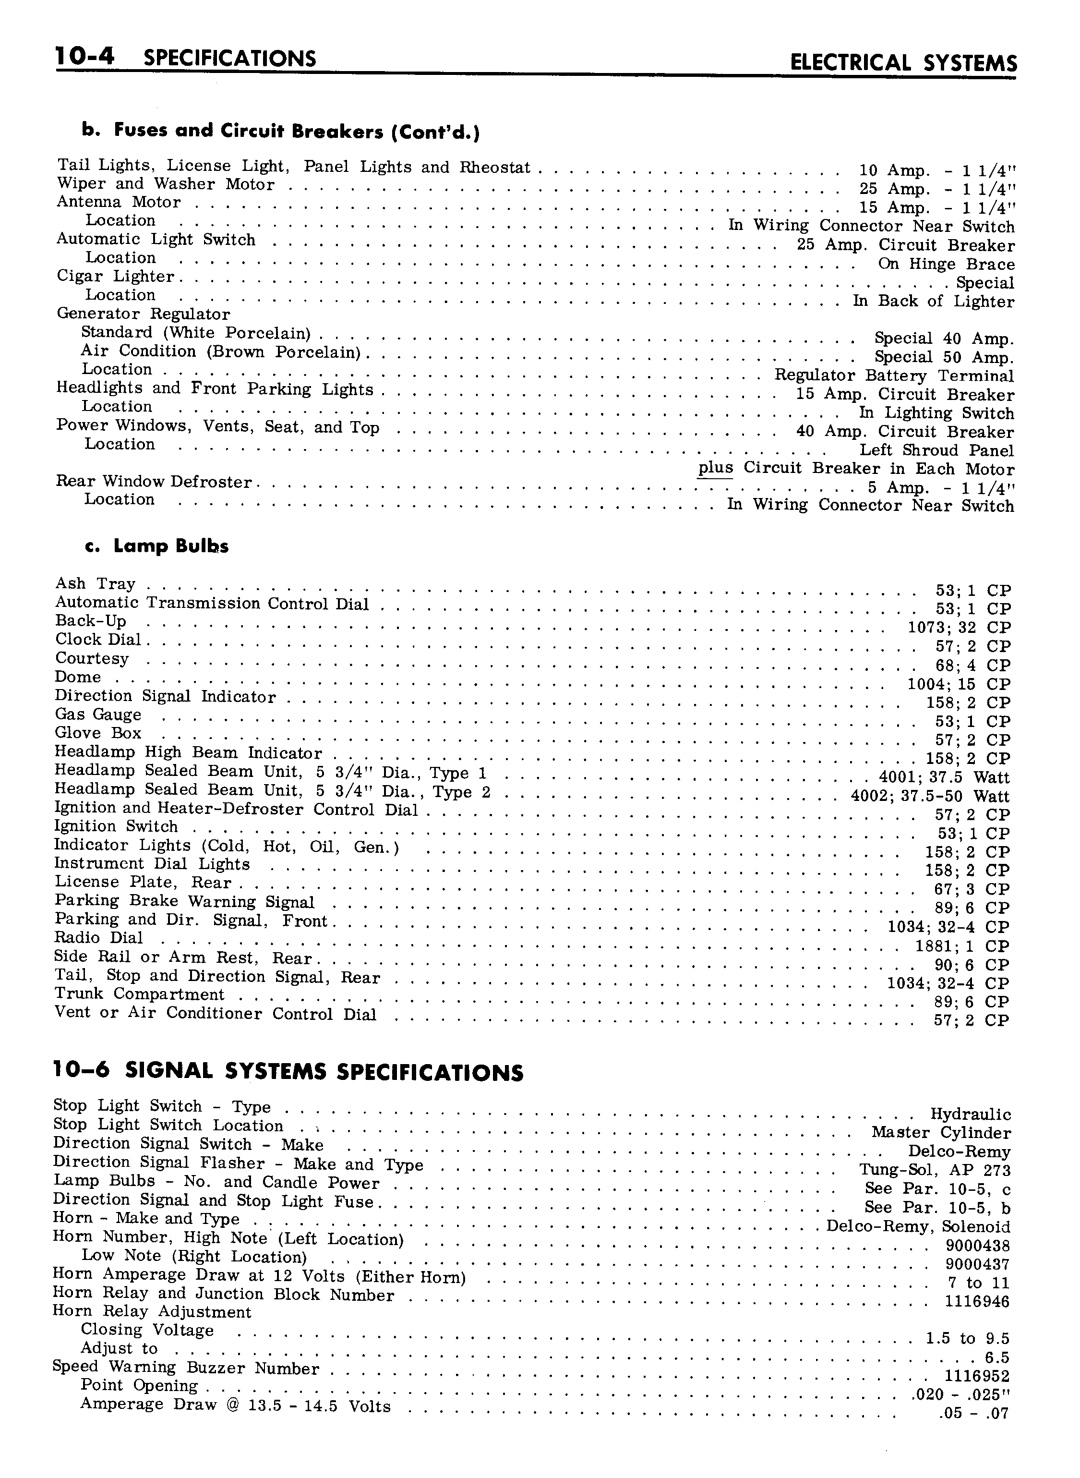 n_10 1961 Buick Shop Manual - Electrical Systems-004-004.jpg